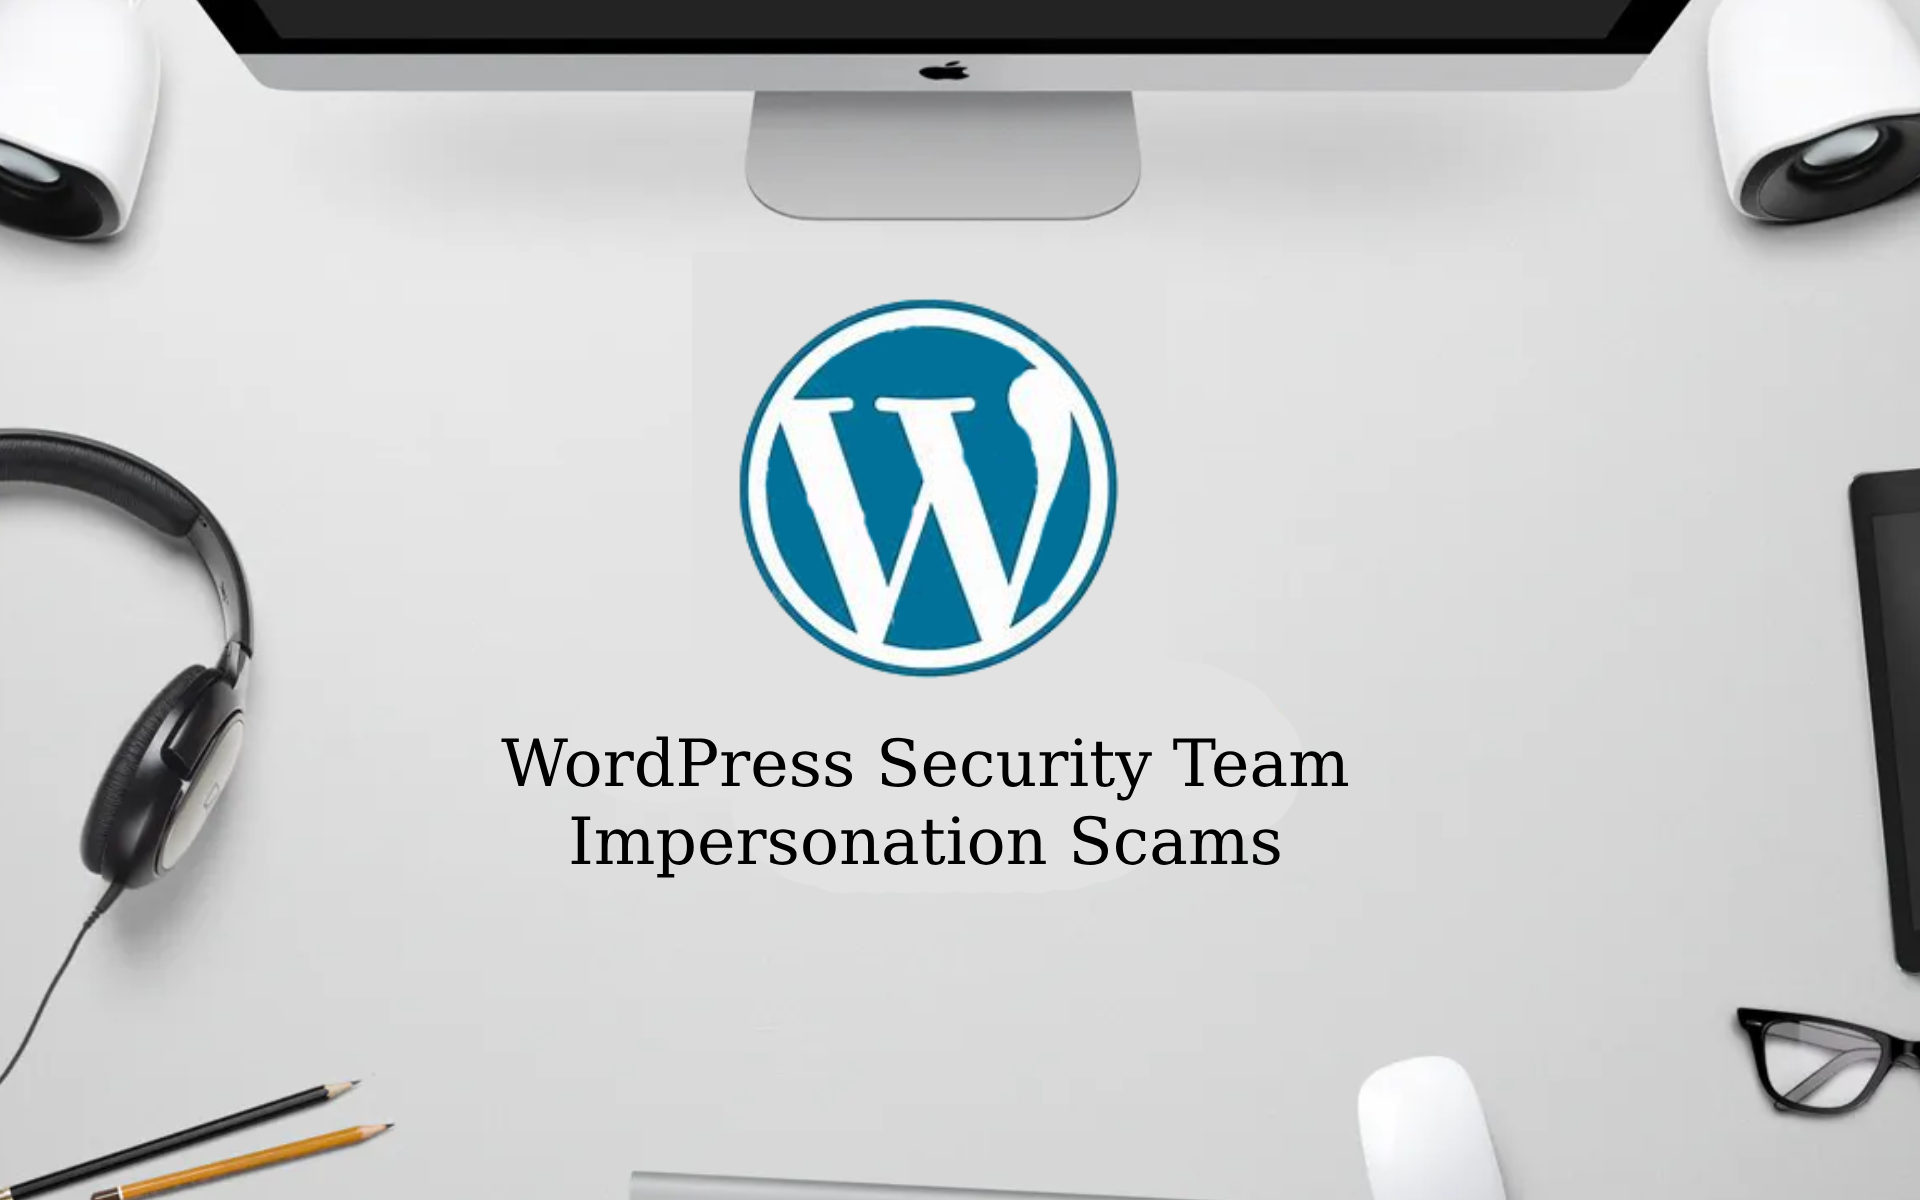 WordPress Security Team Impersonation Scams